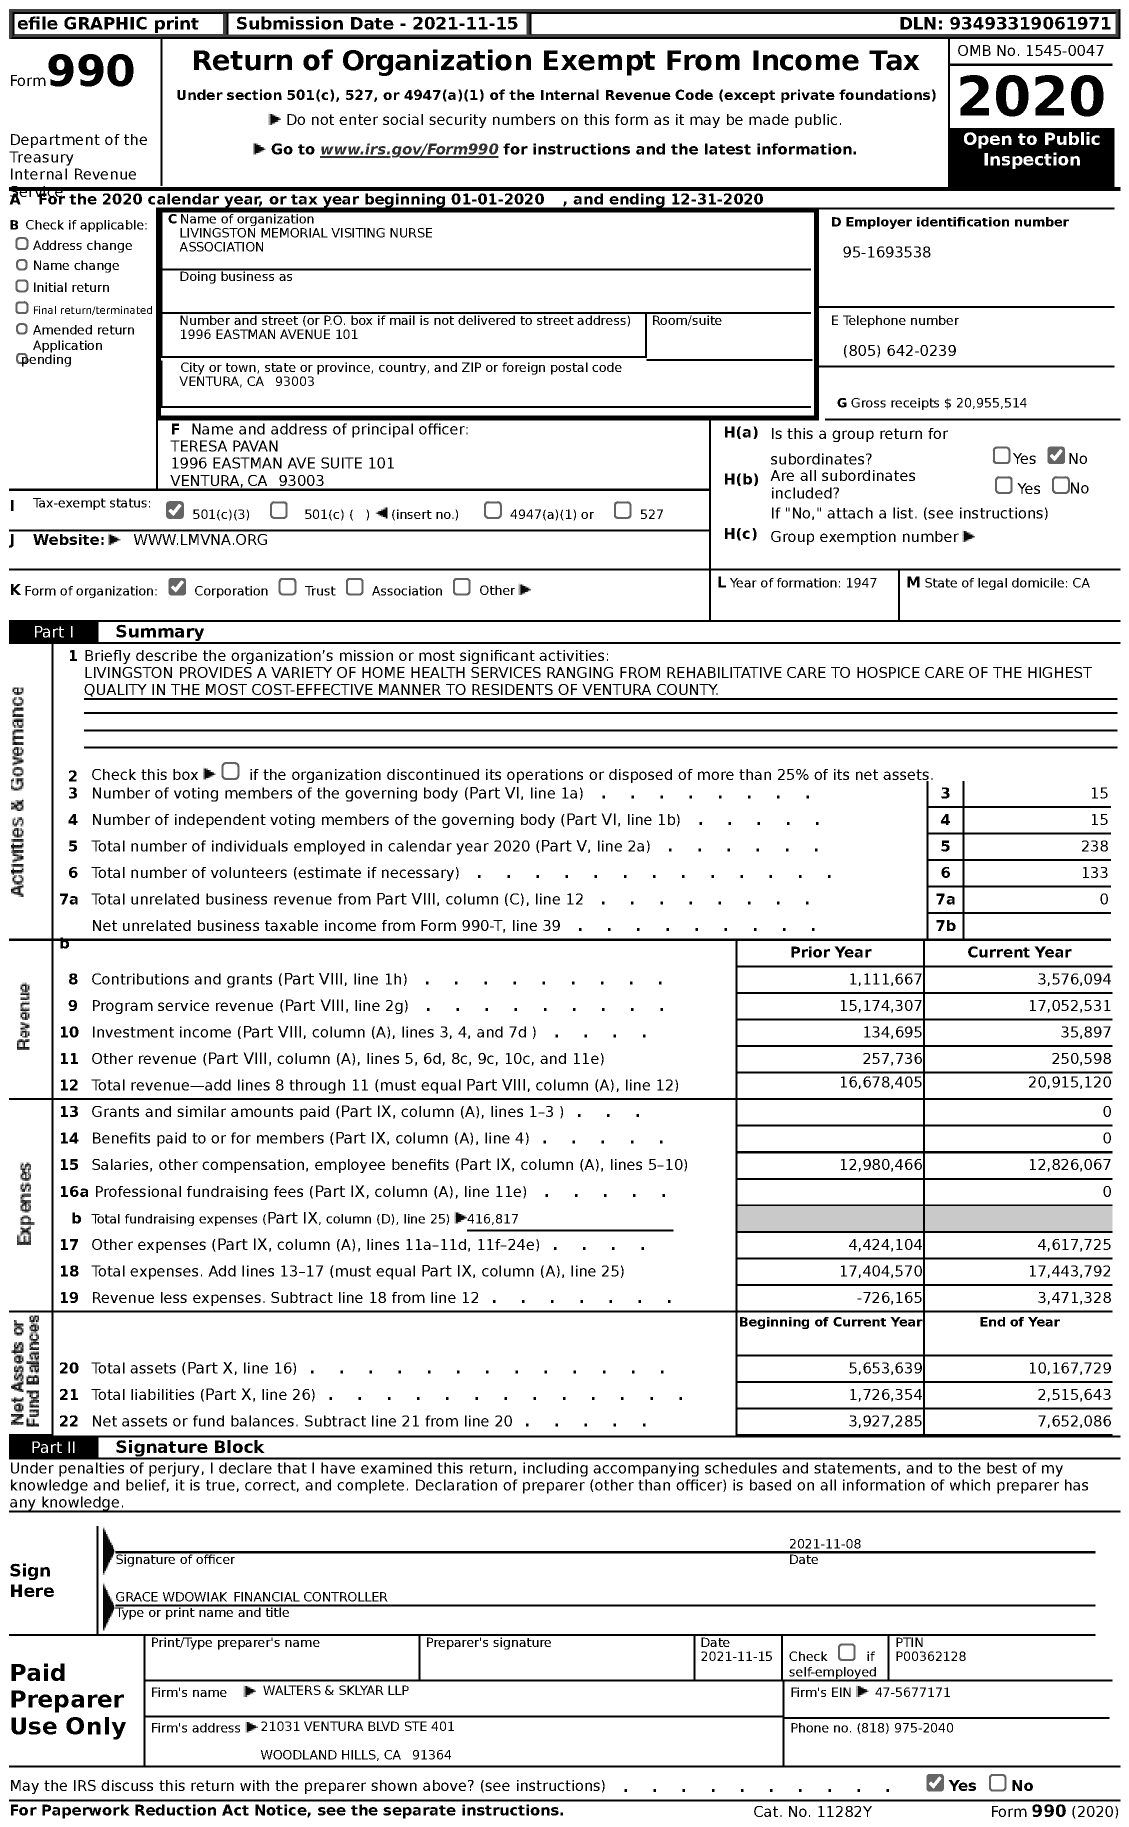 Image of first page of 2020 Form 990 for Livingston Memorial Visiting Nurse Association